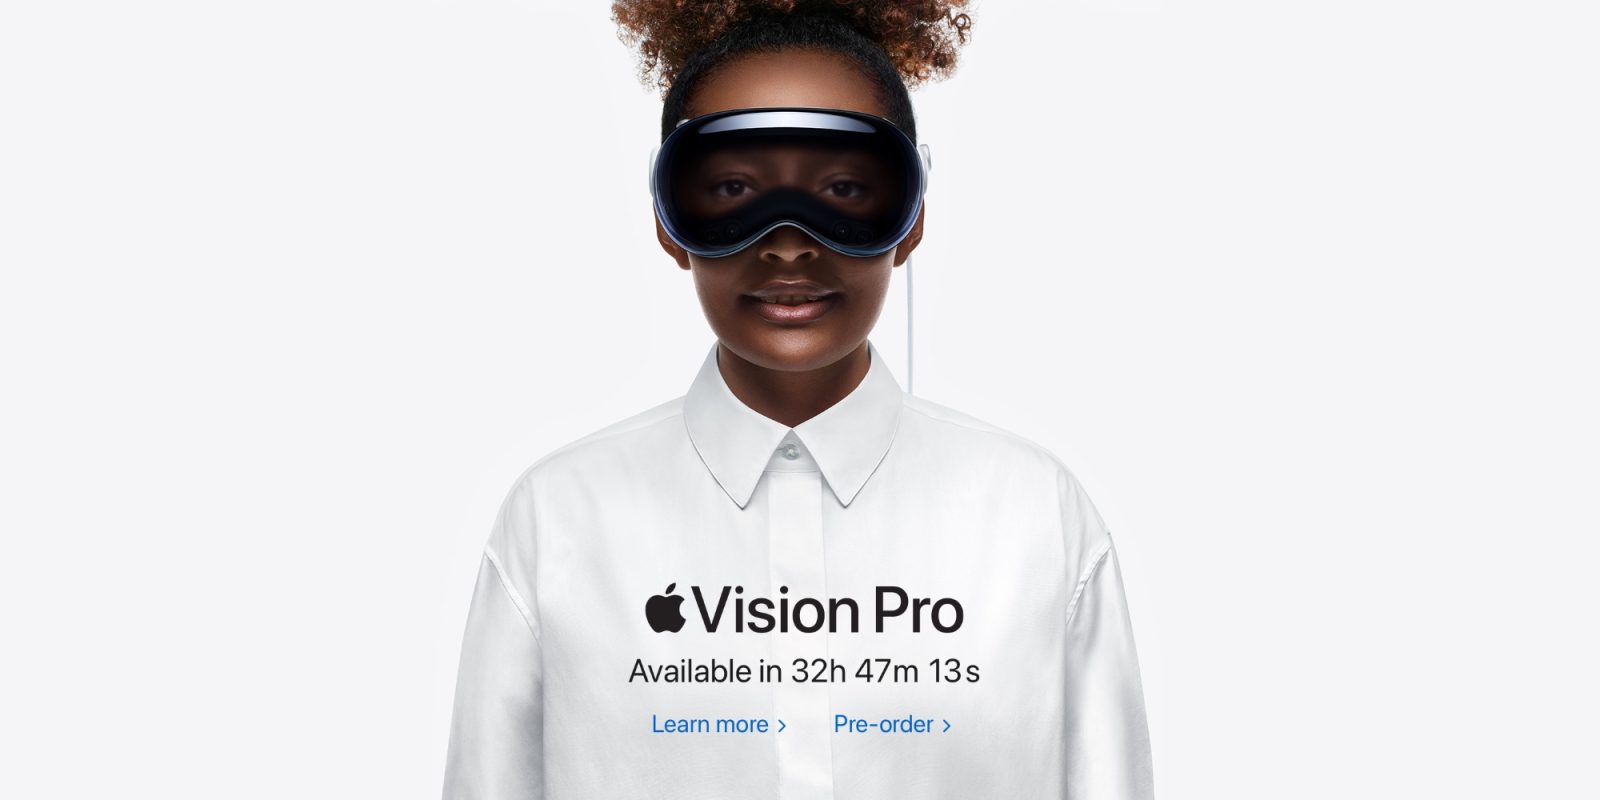 The vision pro countdown clock has officially started on apple․com